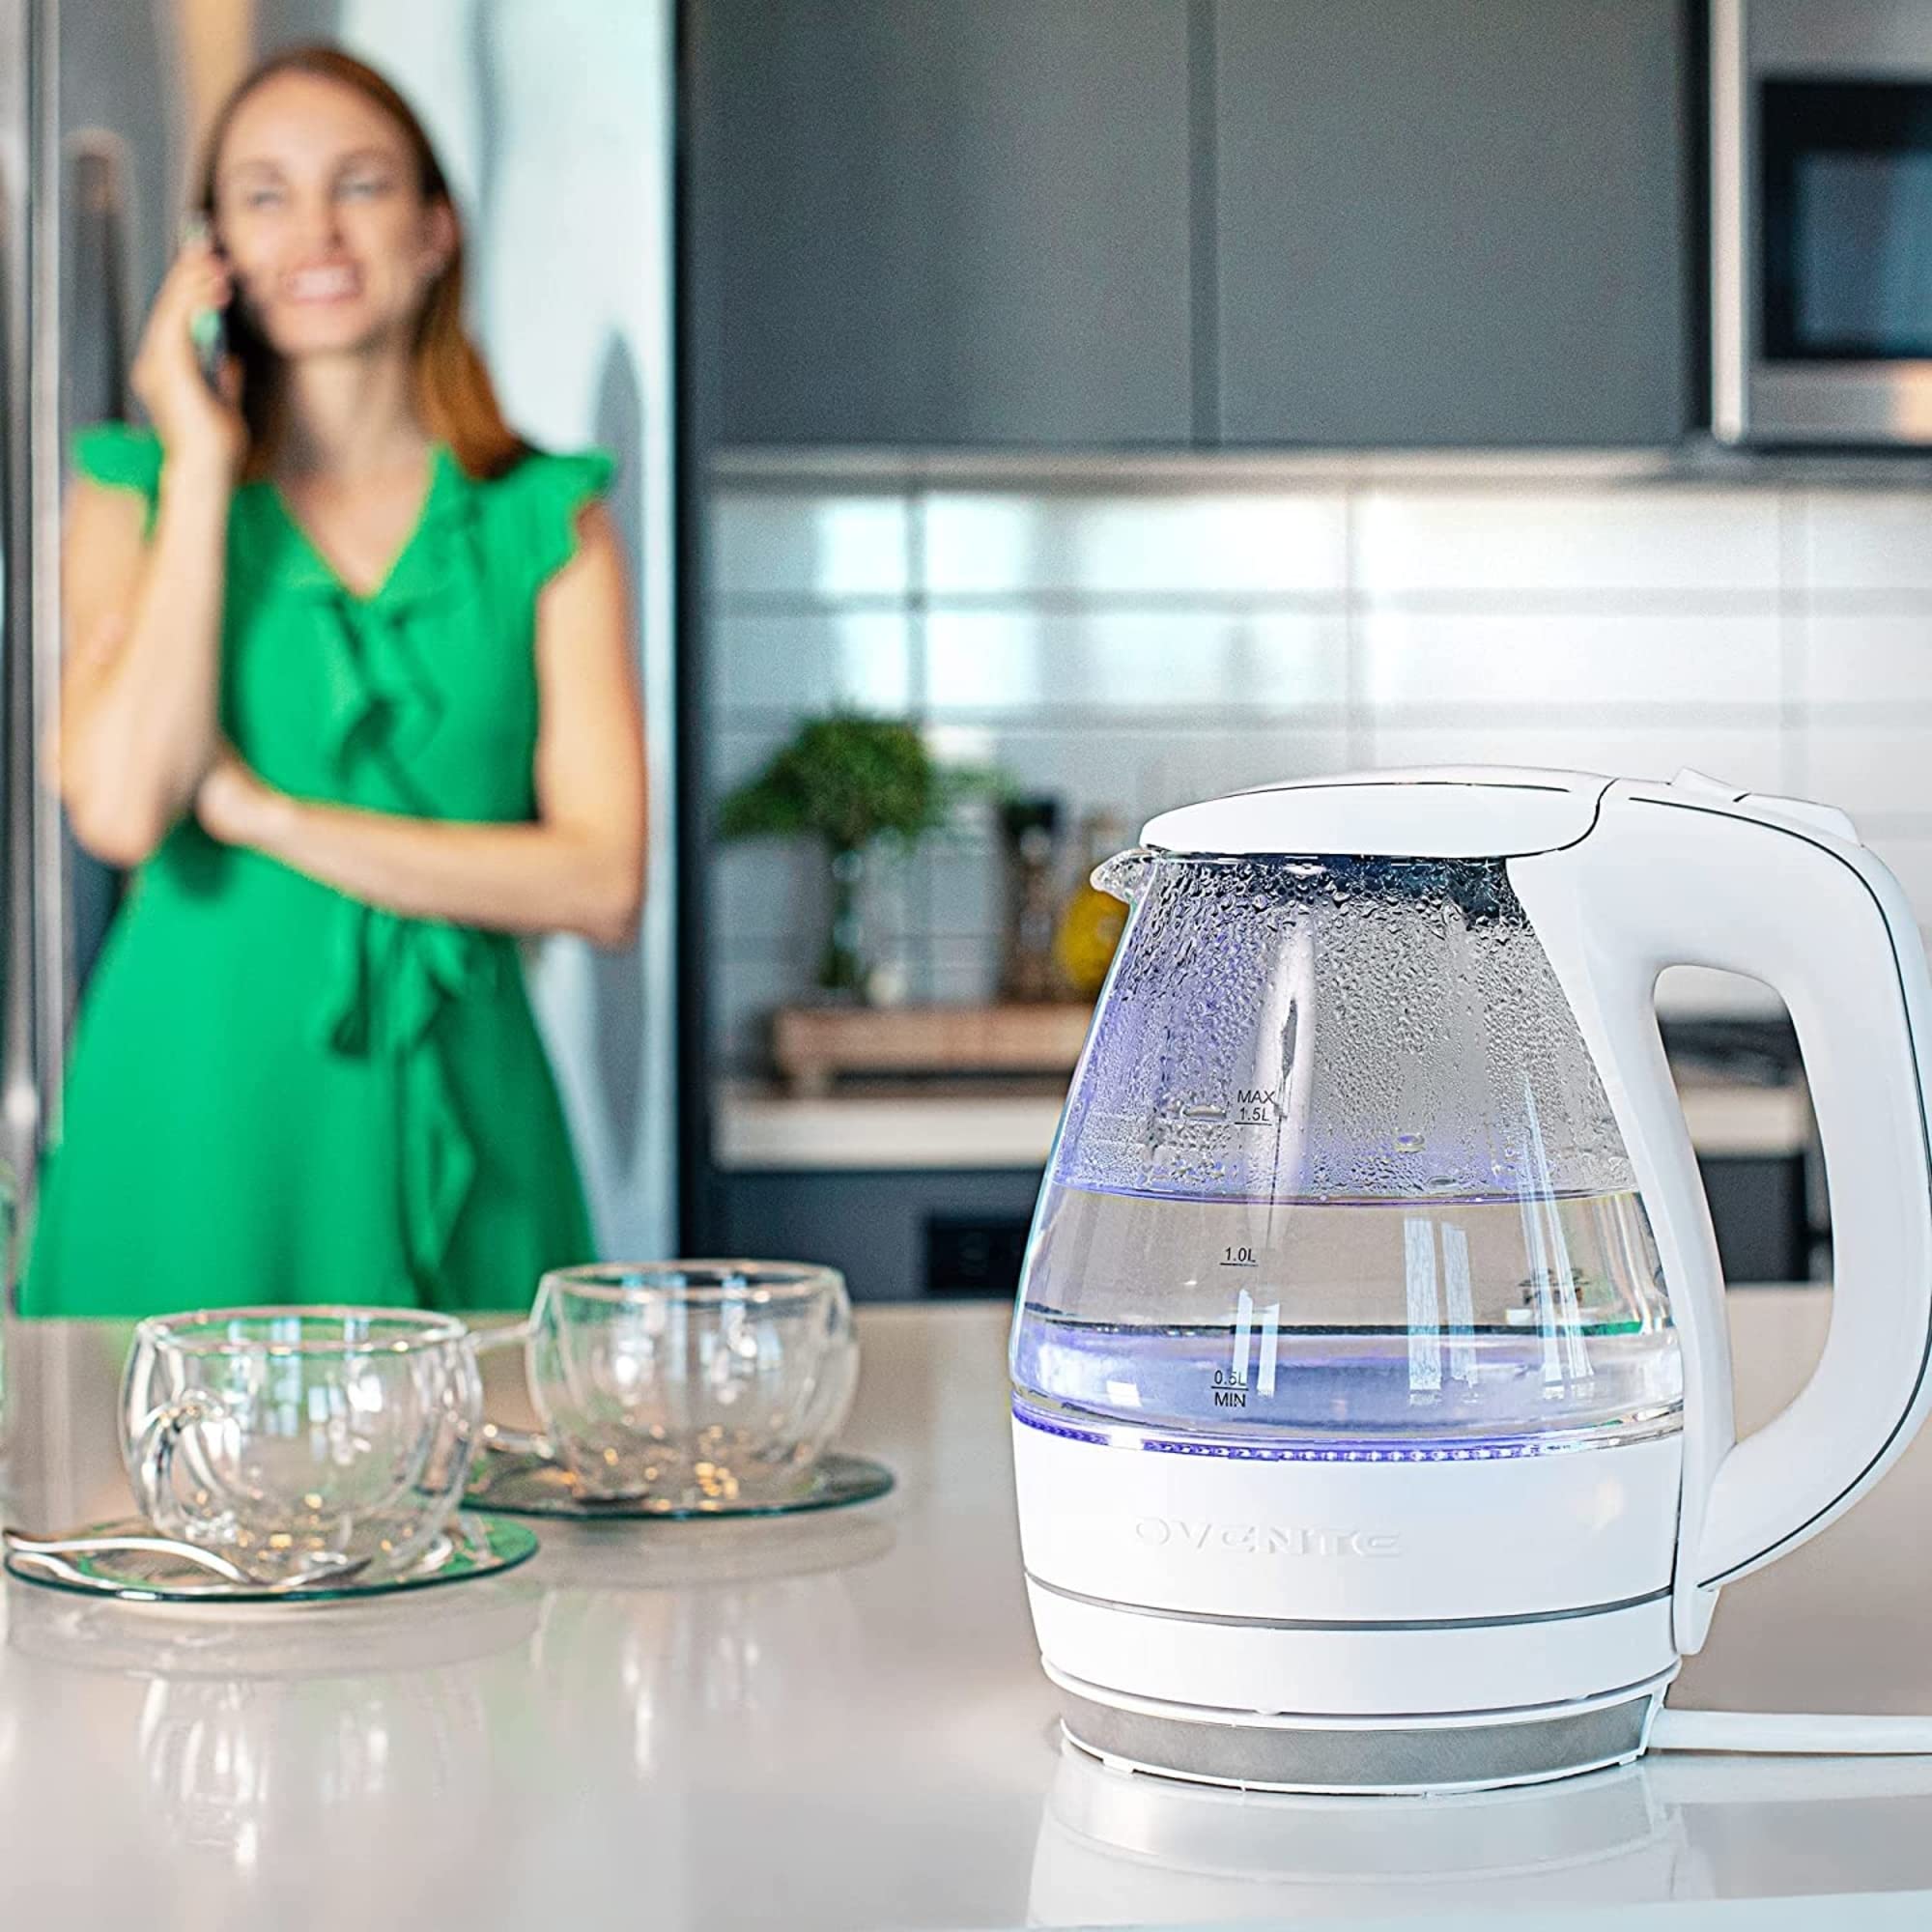 OVENTE Glass Electric Kettle Hot Water Boiler 1.5 Liter Borosilicate Glass Fast Boiling Countertop Heater - BPA Free Auto Shut Off Instant Water Heater Kettle for Coffee & Tea Maker - White KG83W